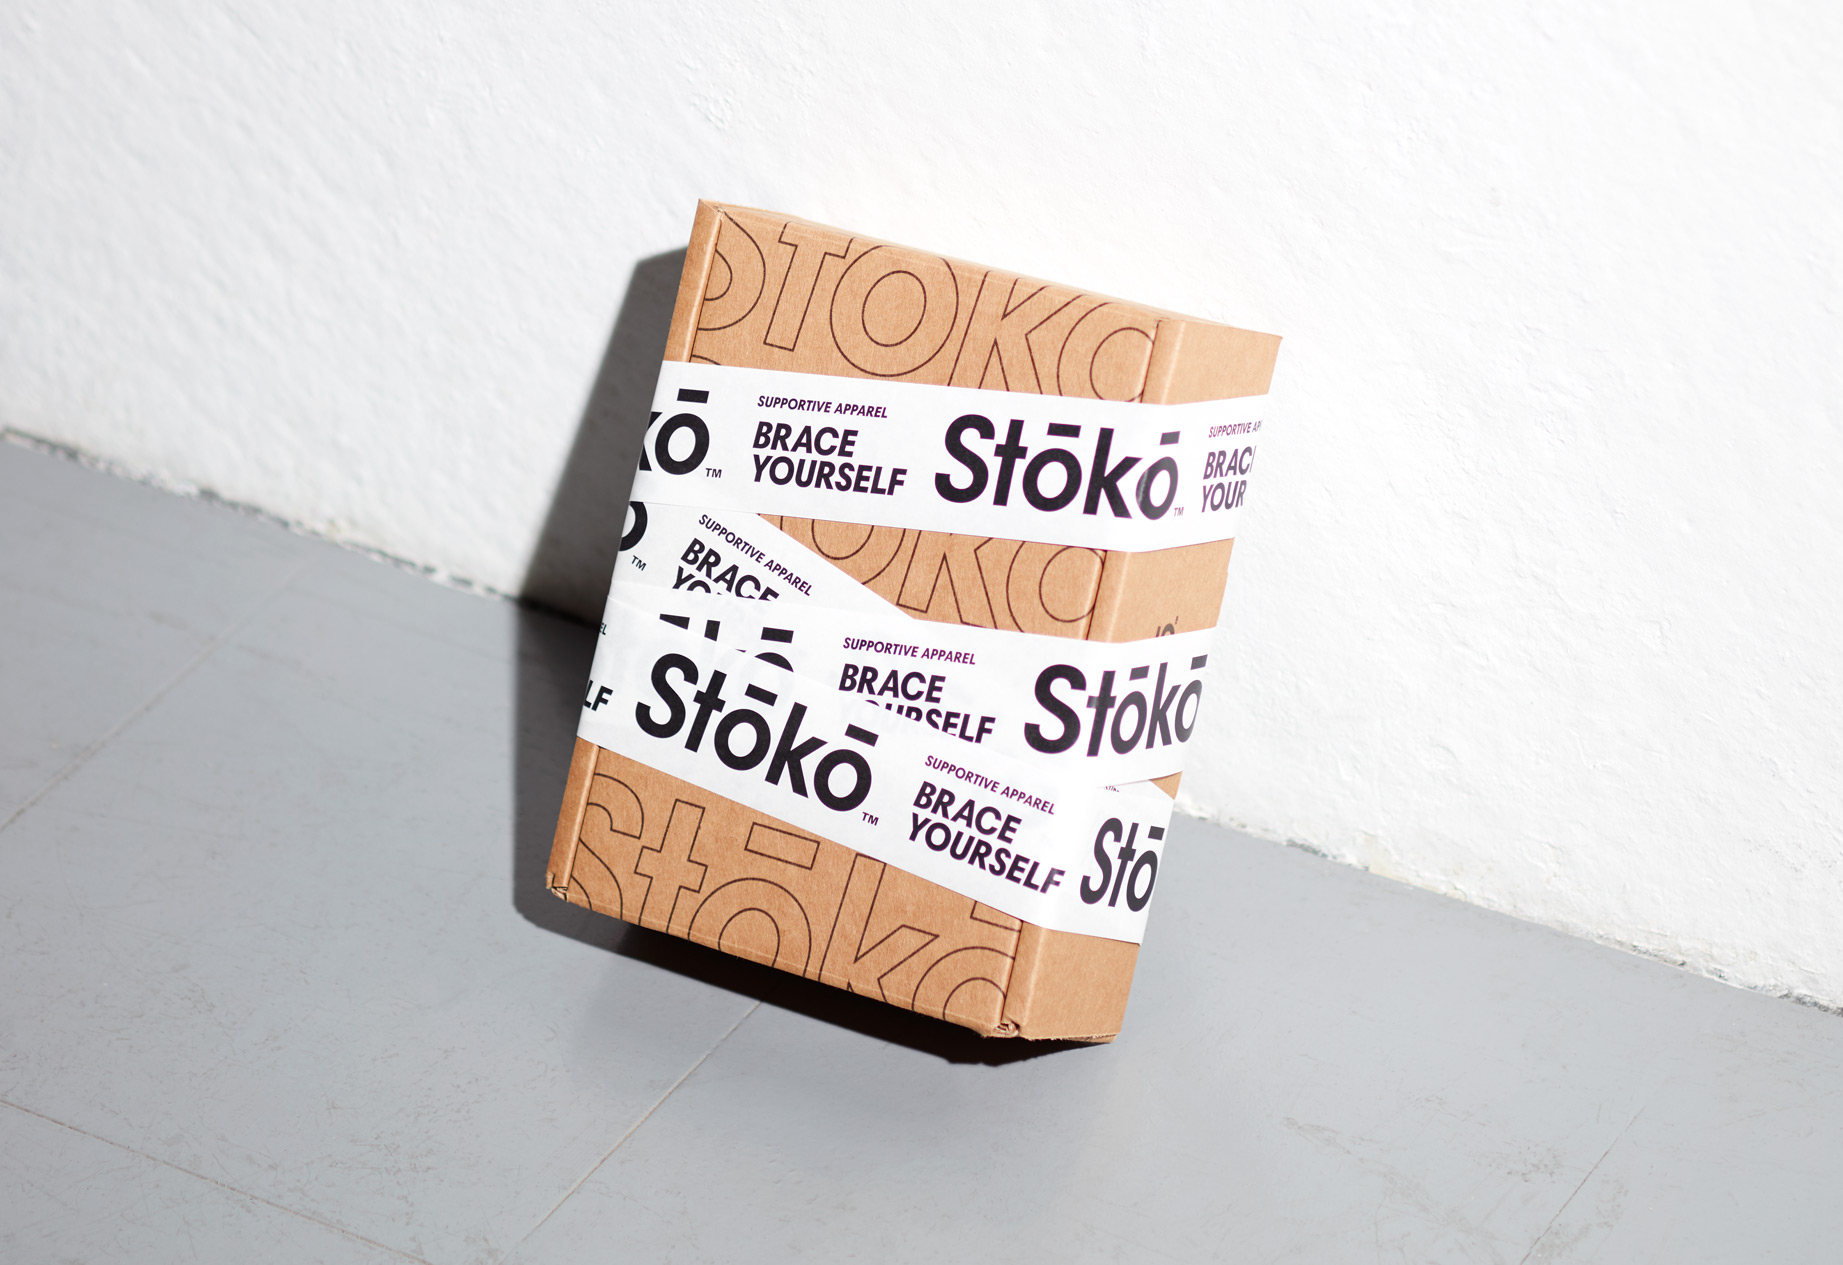 Stoko - Disrupting the Bracing Space by Pendo - World Brand Design Society